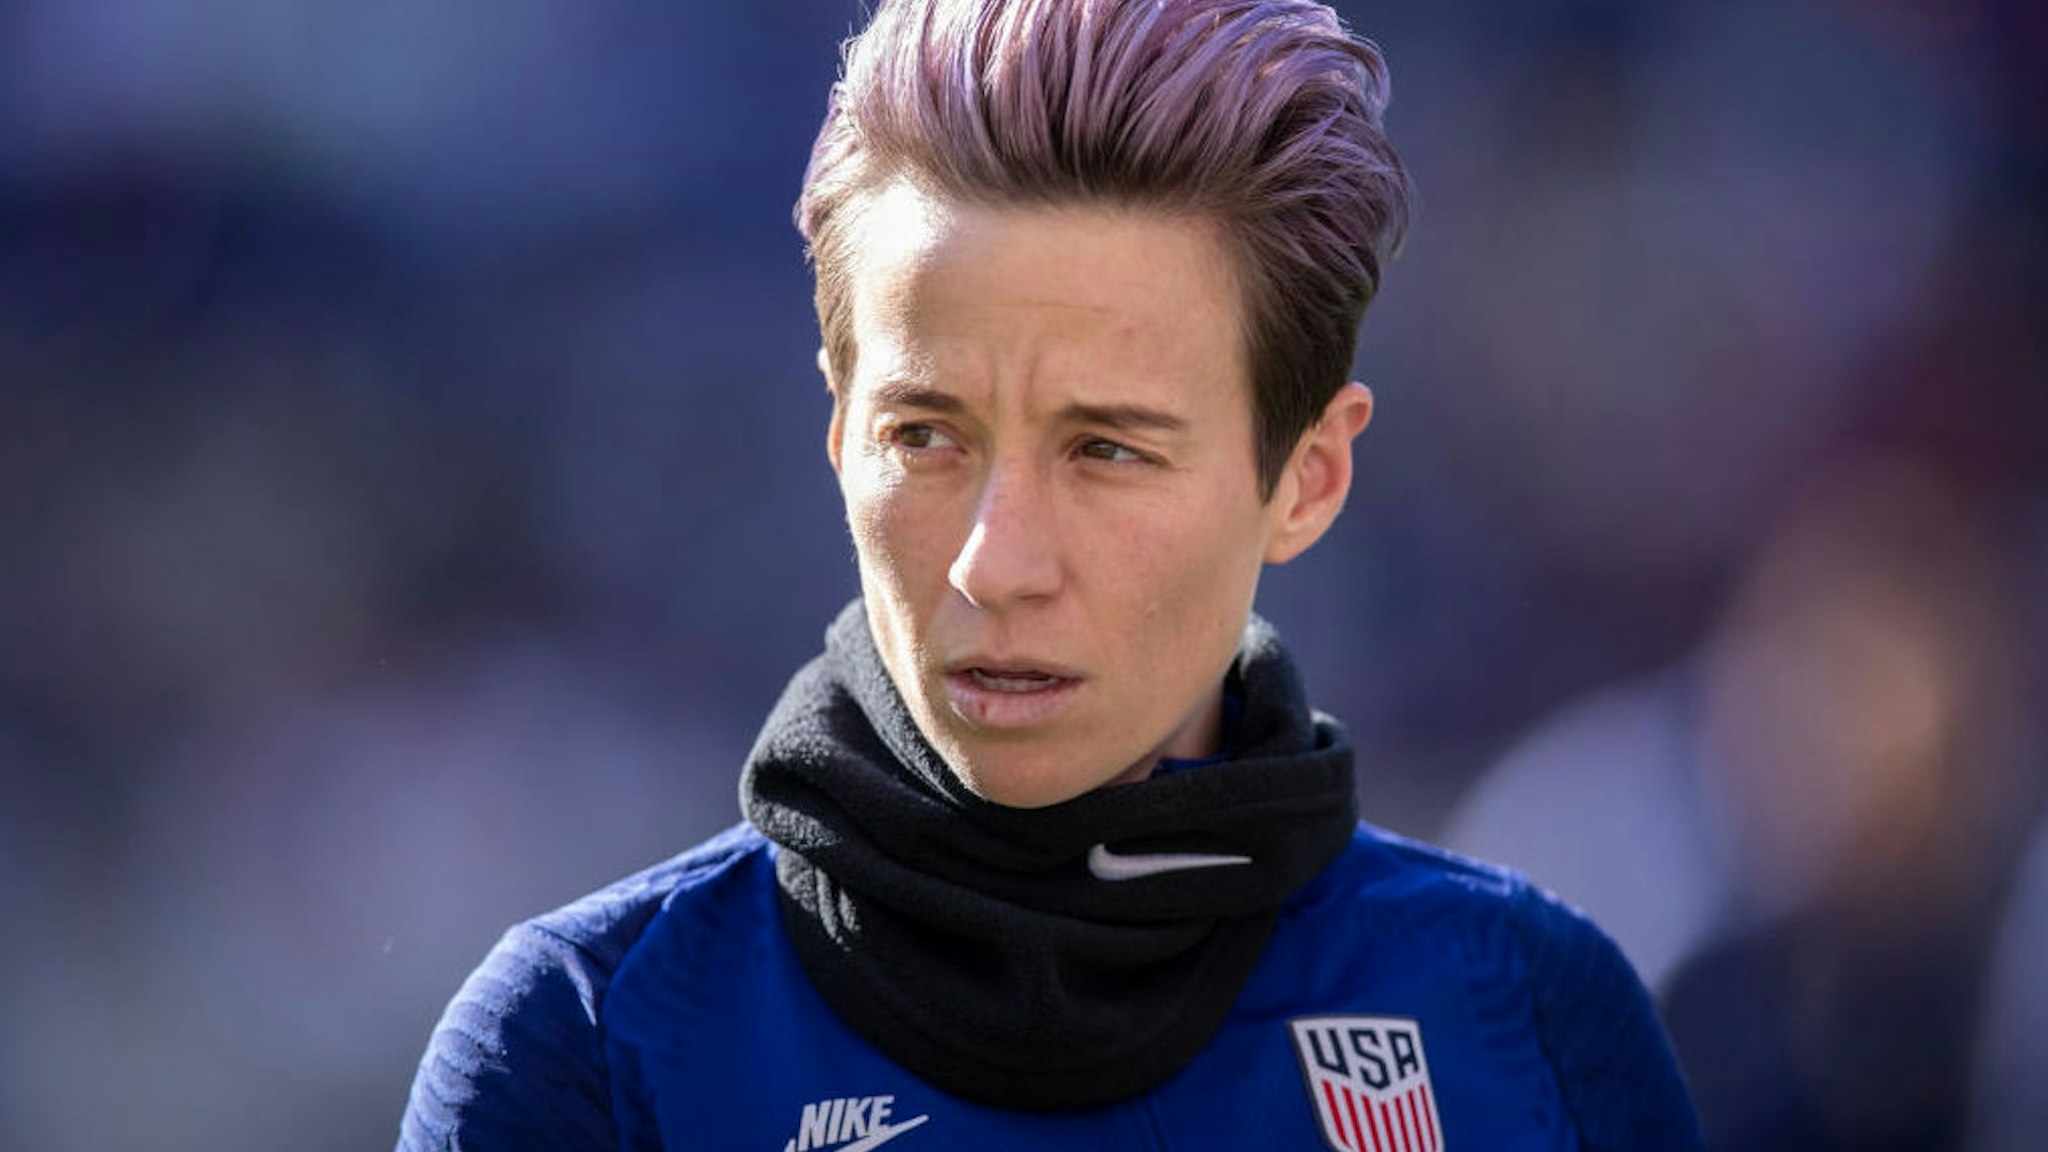 Megan Rapinoe #15 of the United States with pink hair warms up for the 2020 SheBelieves Cup match between United States and Spain sponsored by Visa. The match took place at Red Bull Arena on March 08, 2020 in Harrison, NJ, USA.